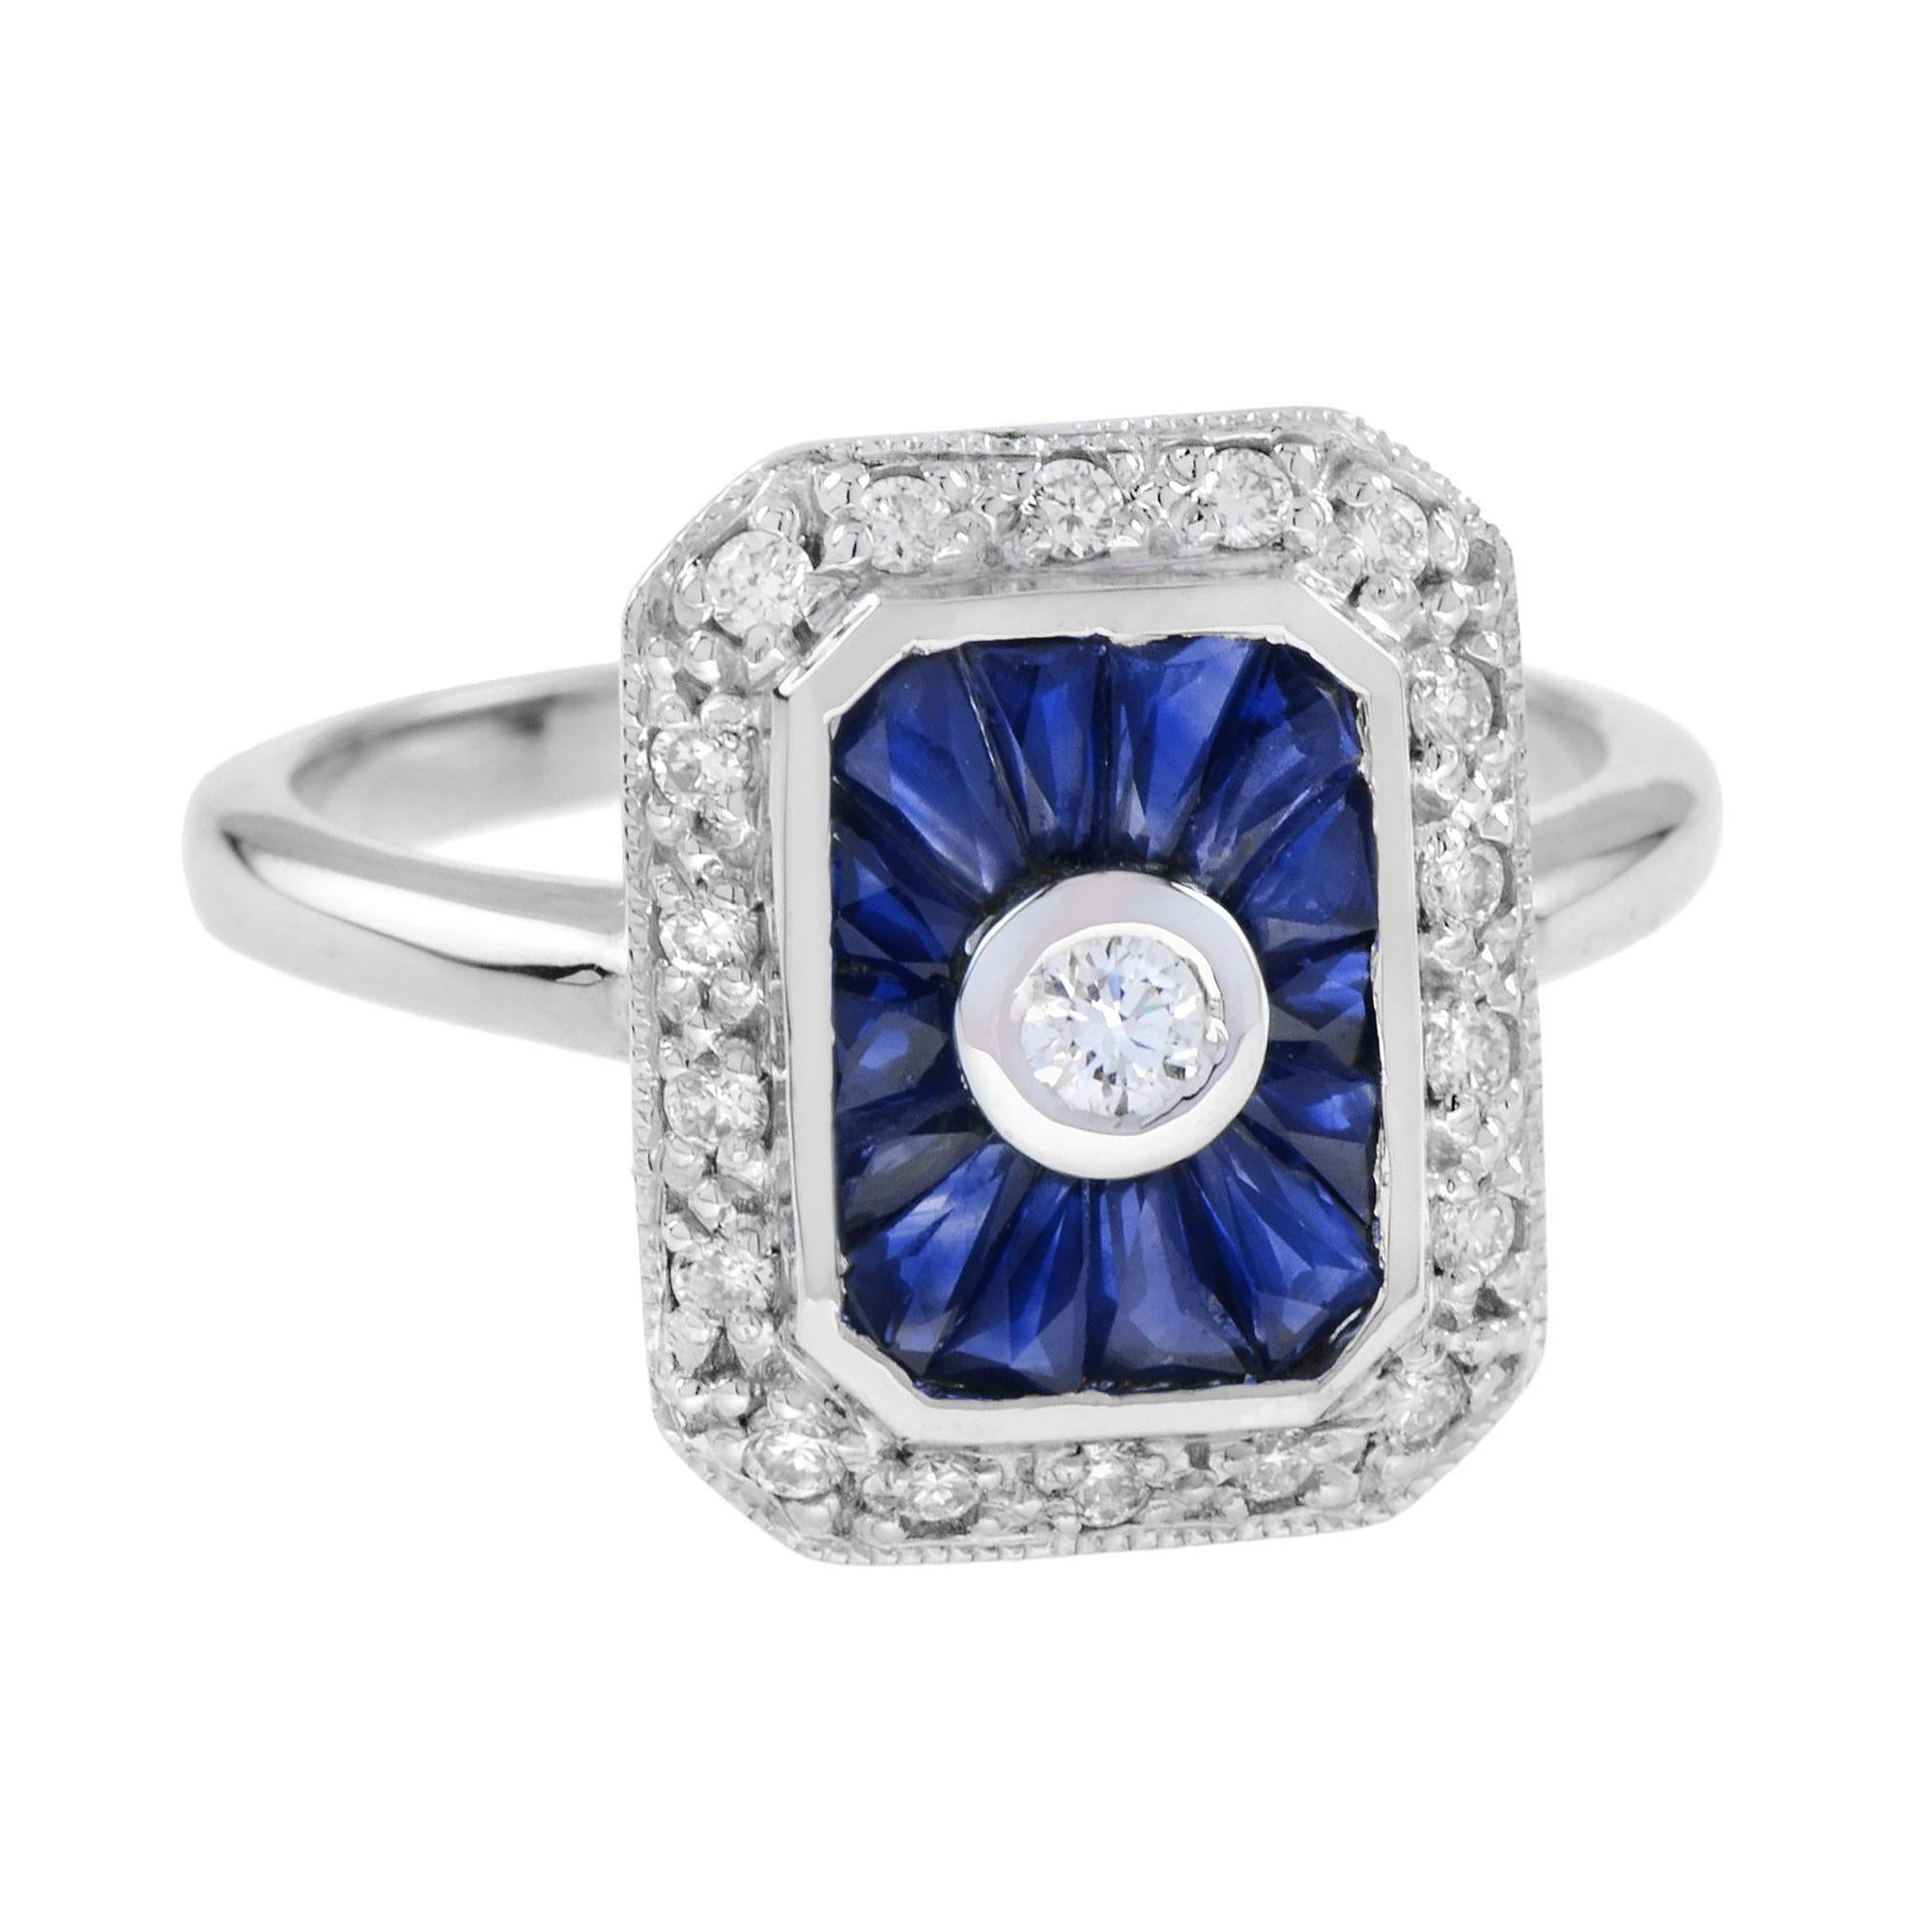 Round Cut Diamond and Sapphire Art Deco Style Engagement Ring in 9K White Gold